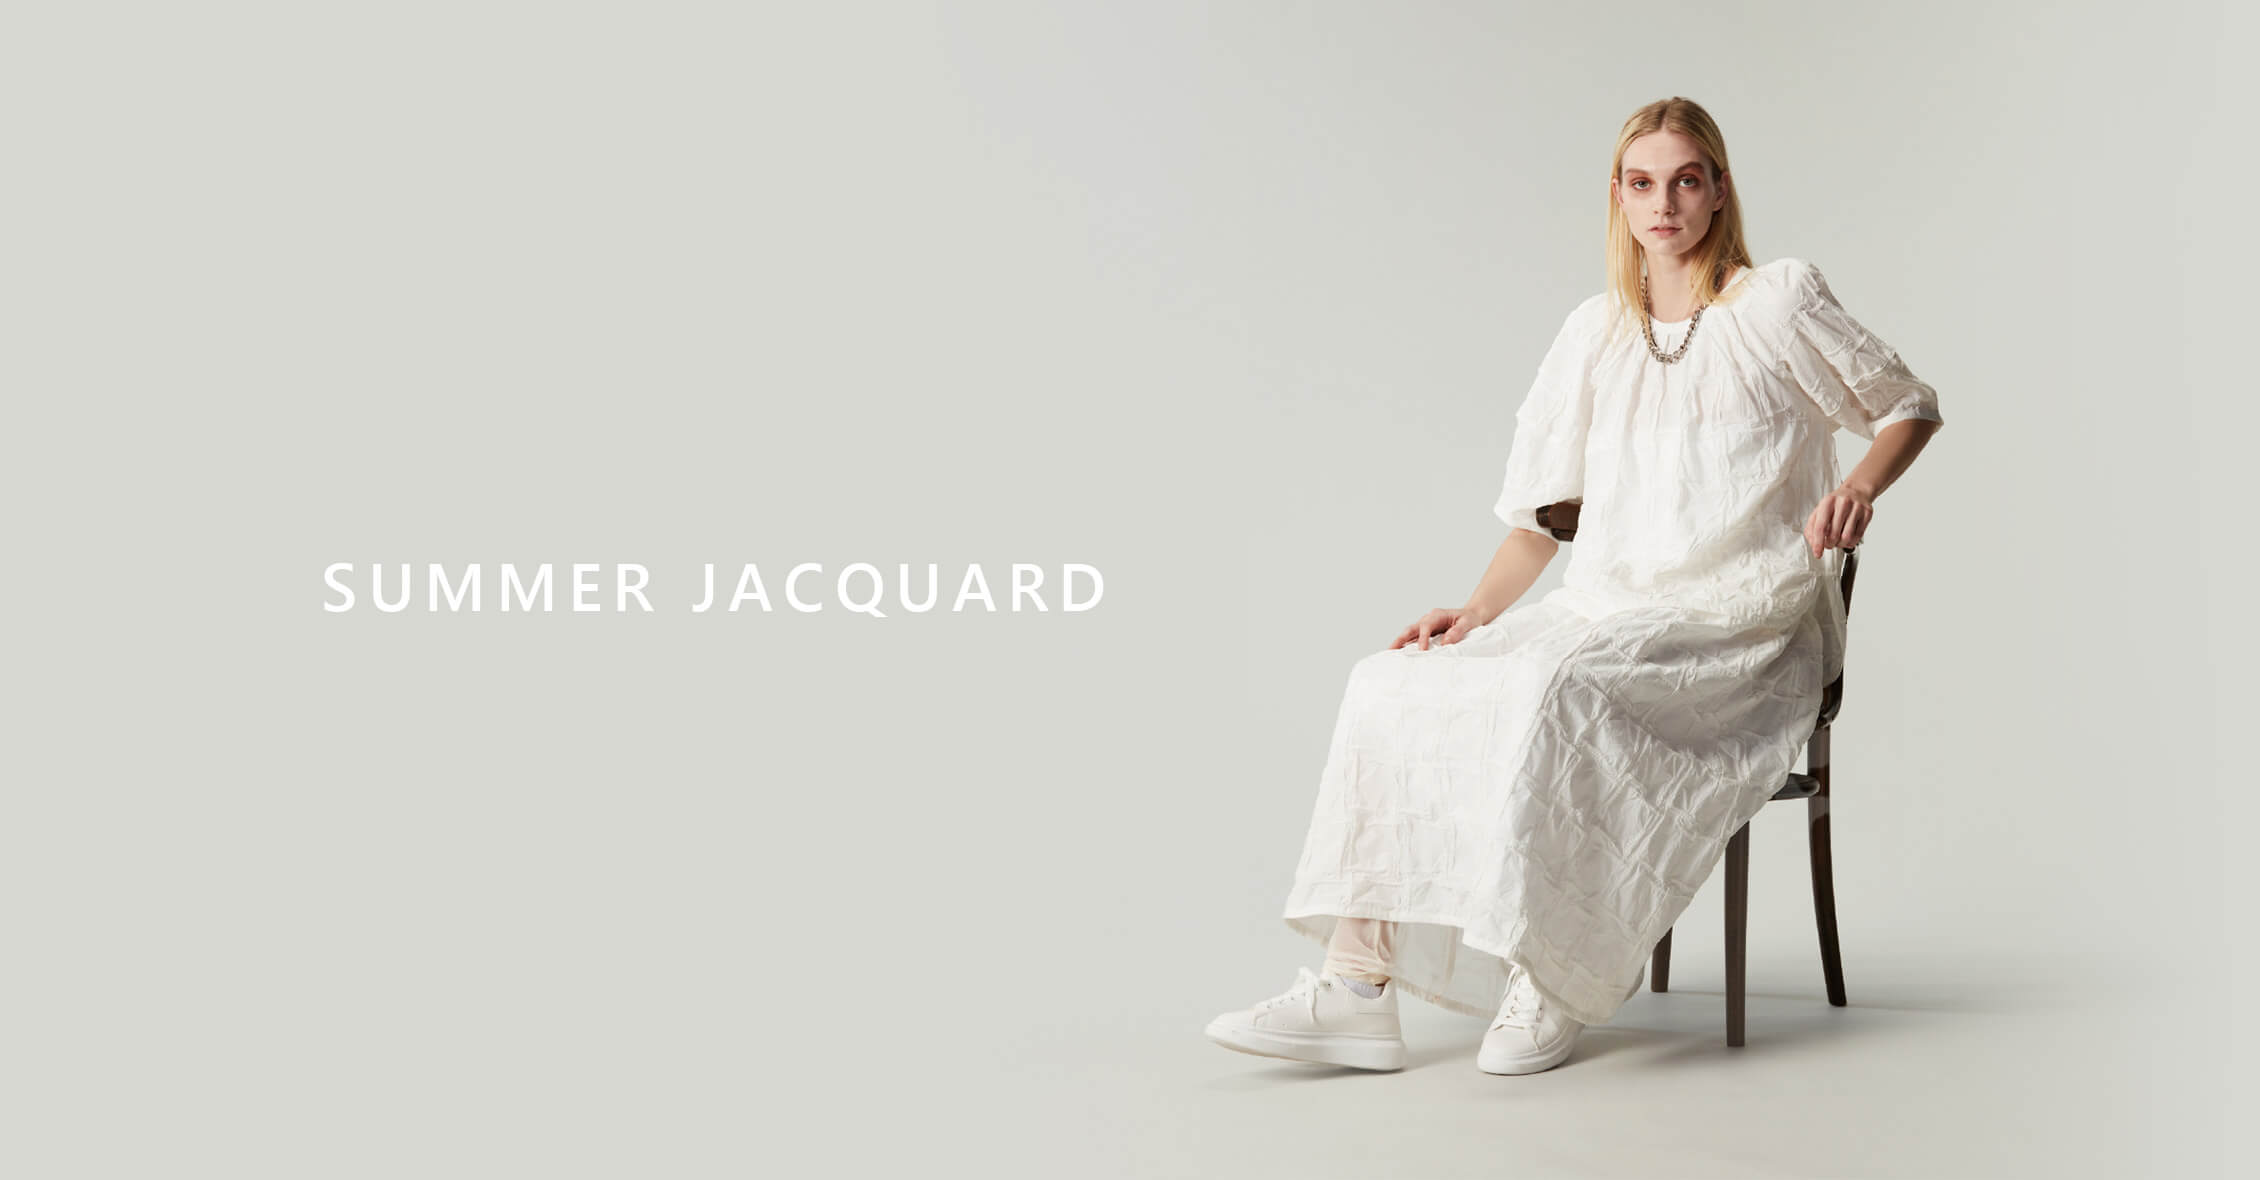 SUMMER JACQUARD COLLECTION